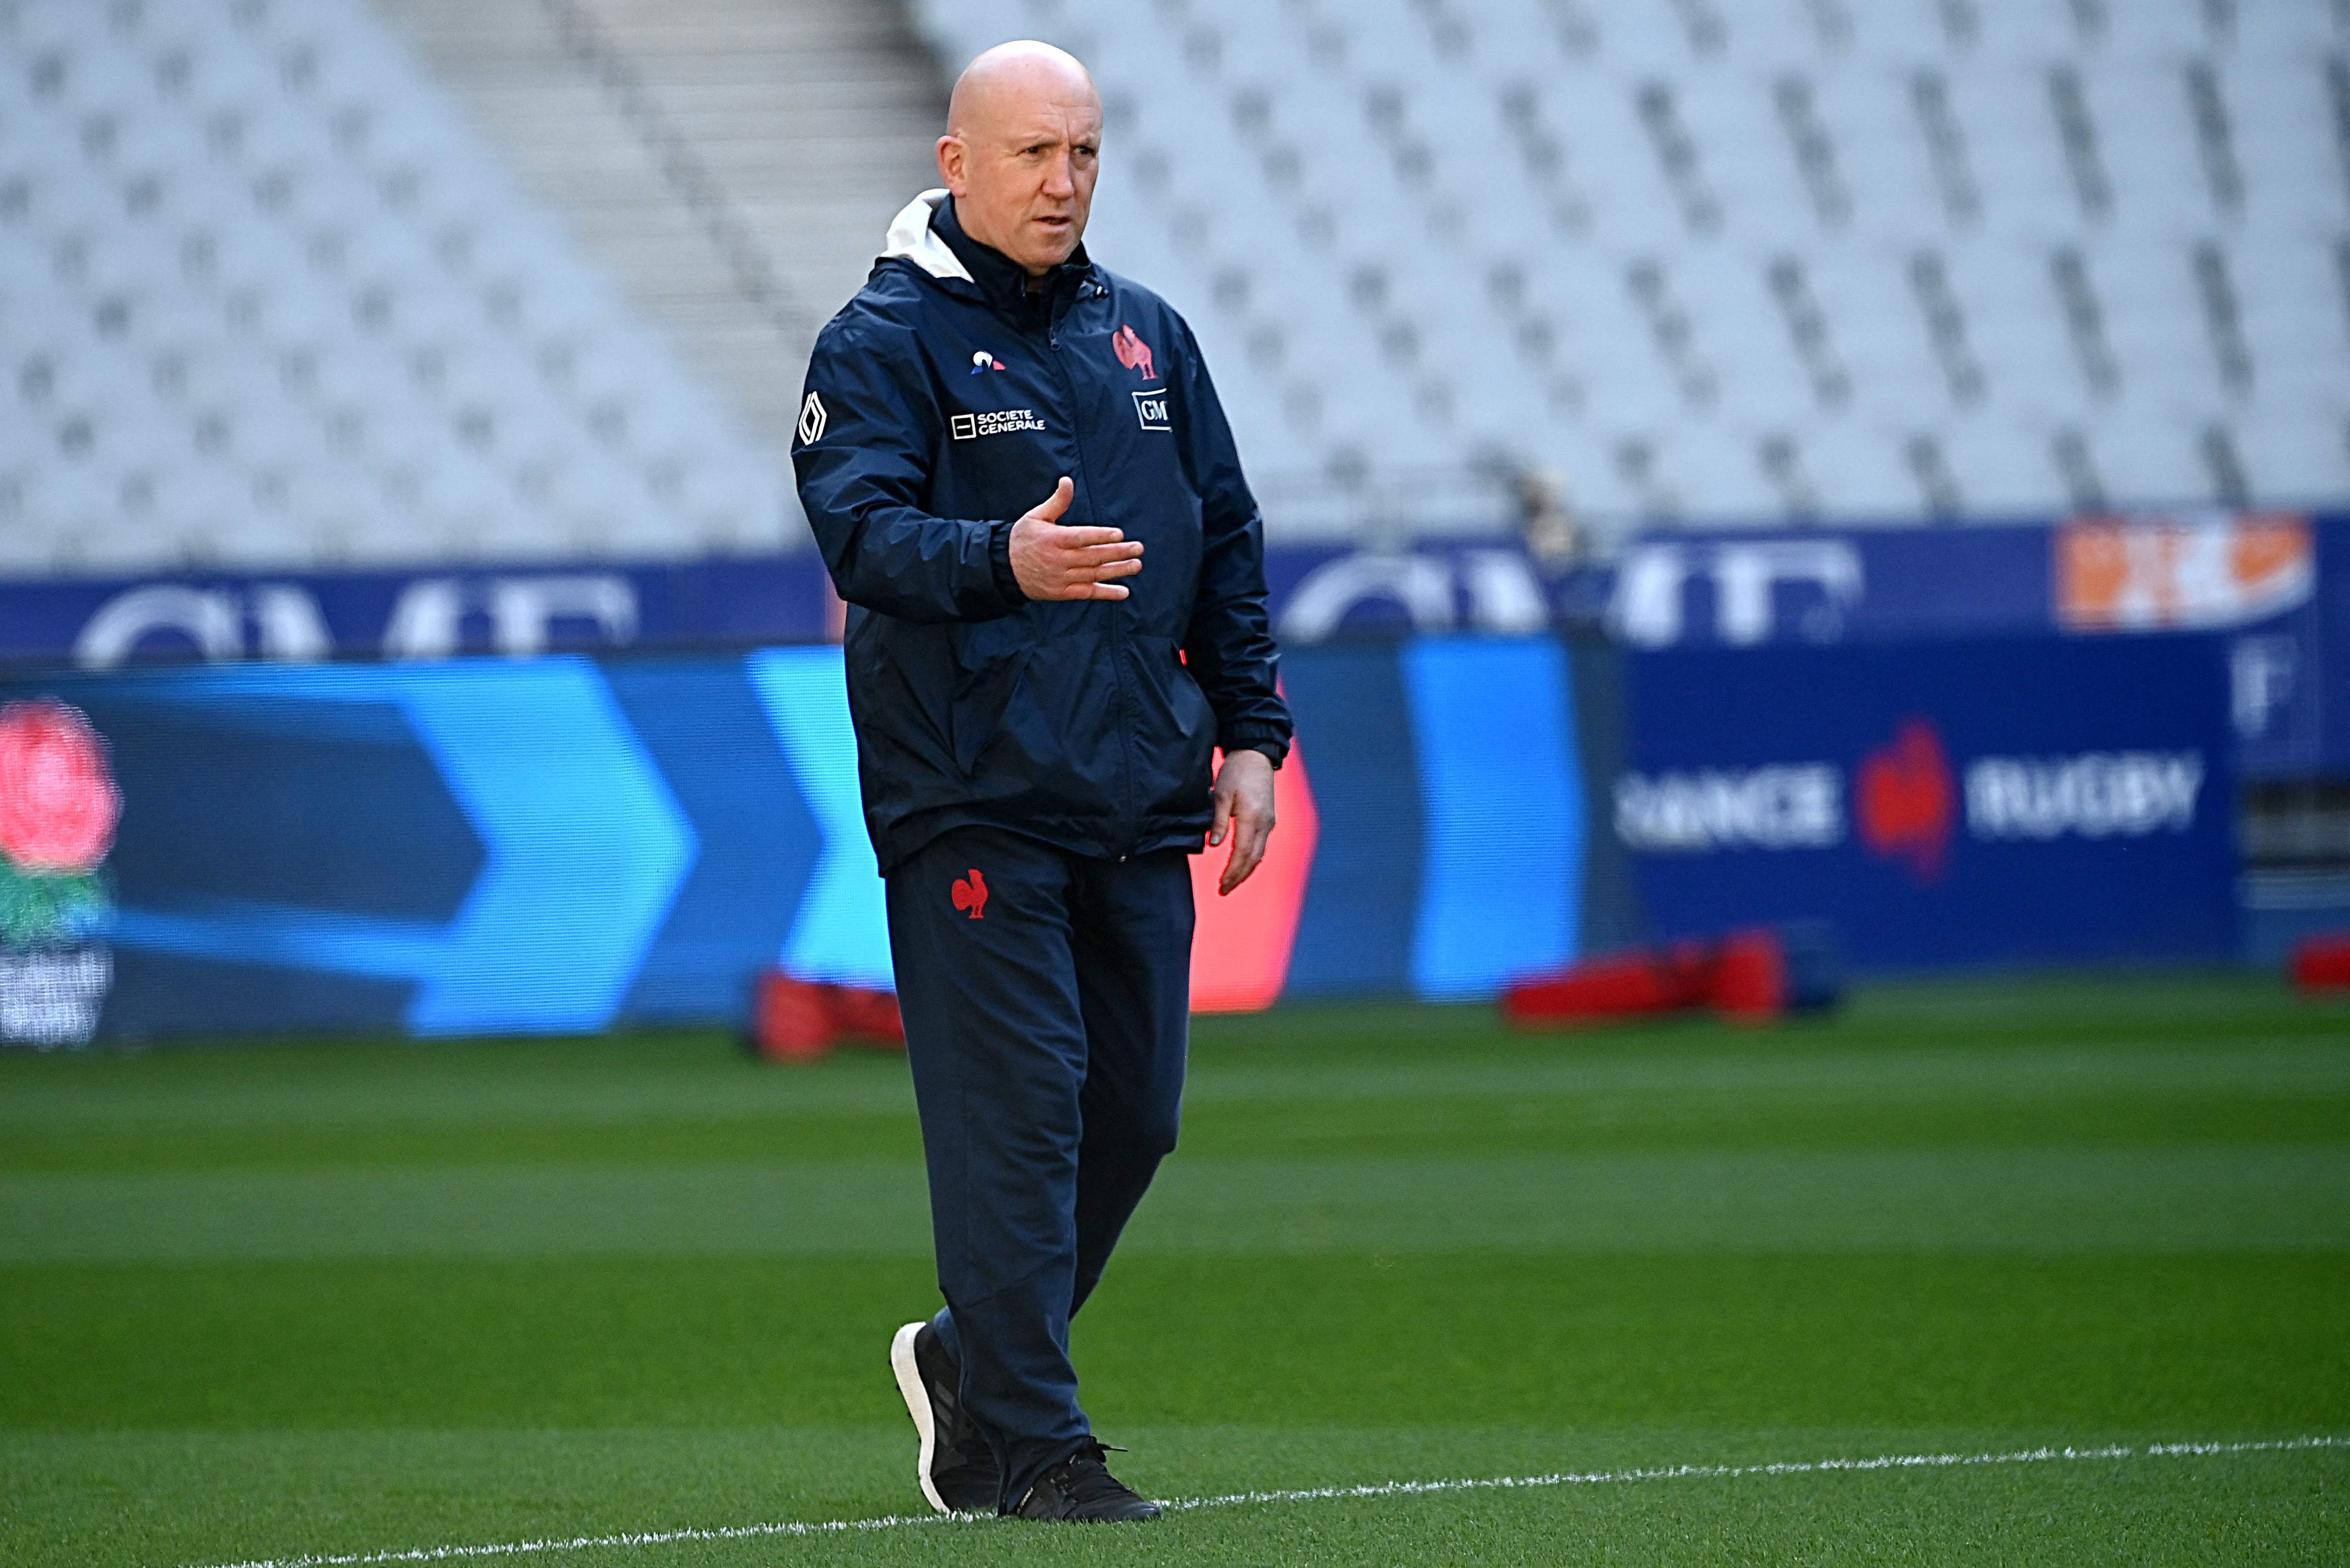 France’s defence coach Shaun Edwards has made a big impact according to Antoine Dupont